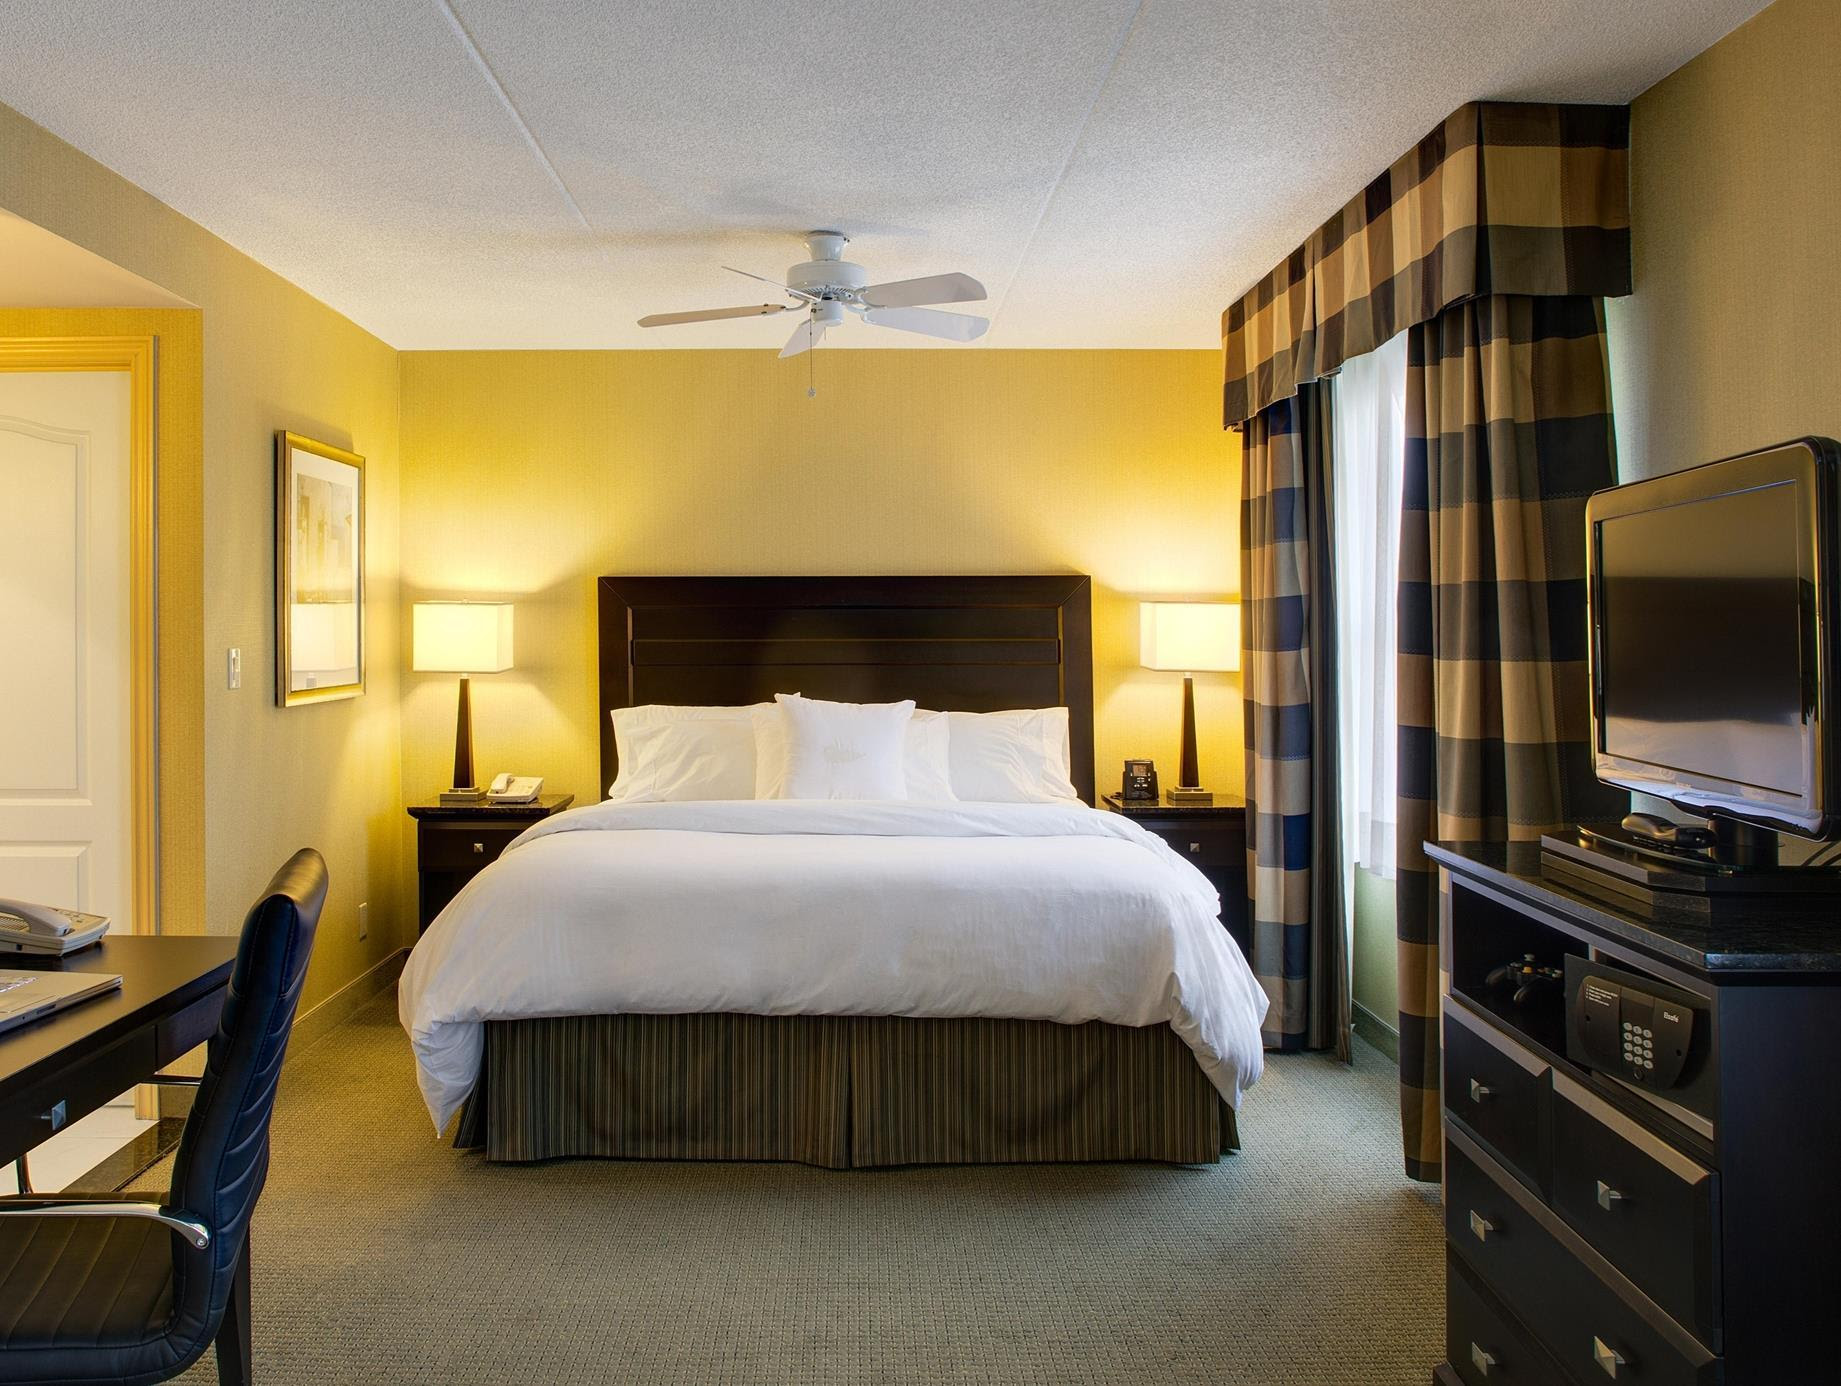 Homewood Suites by Hilton London Ontario Reviews